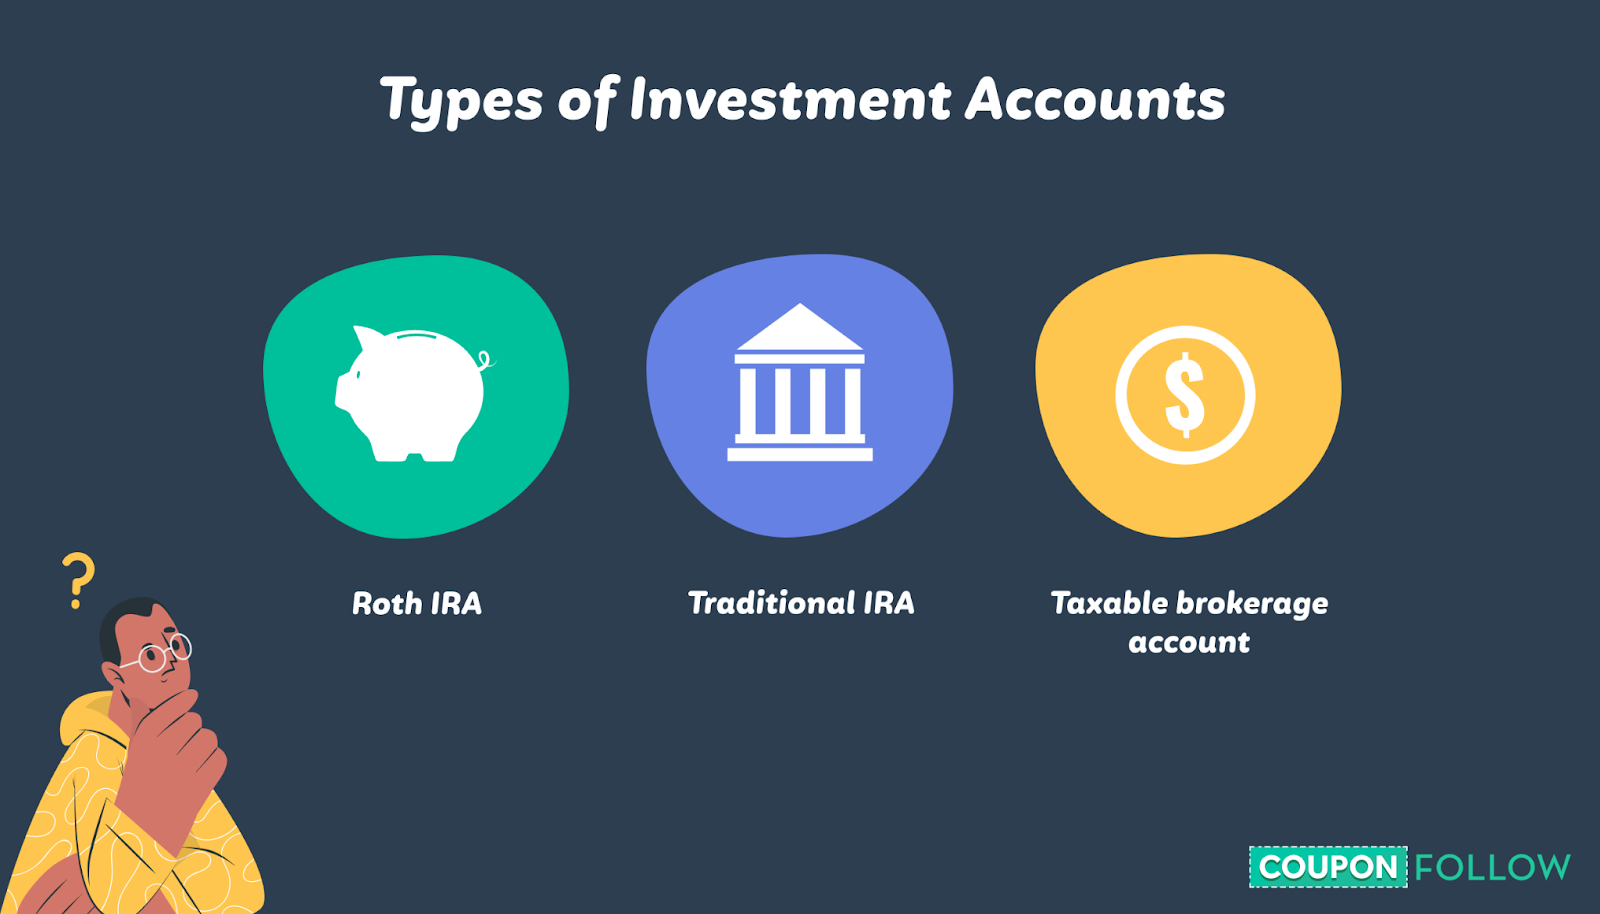 Choosing an investment account type